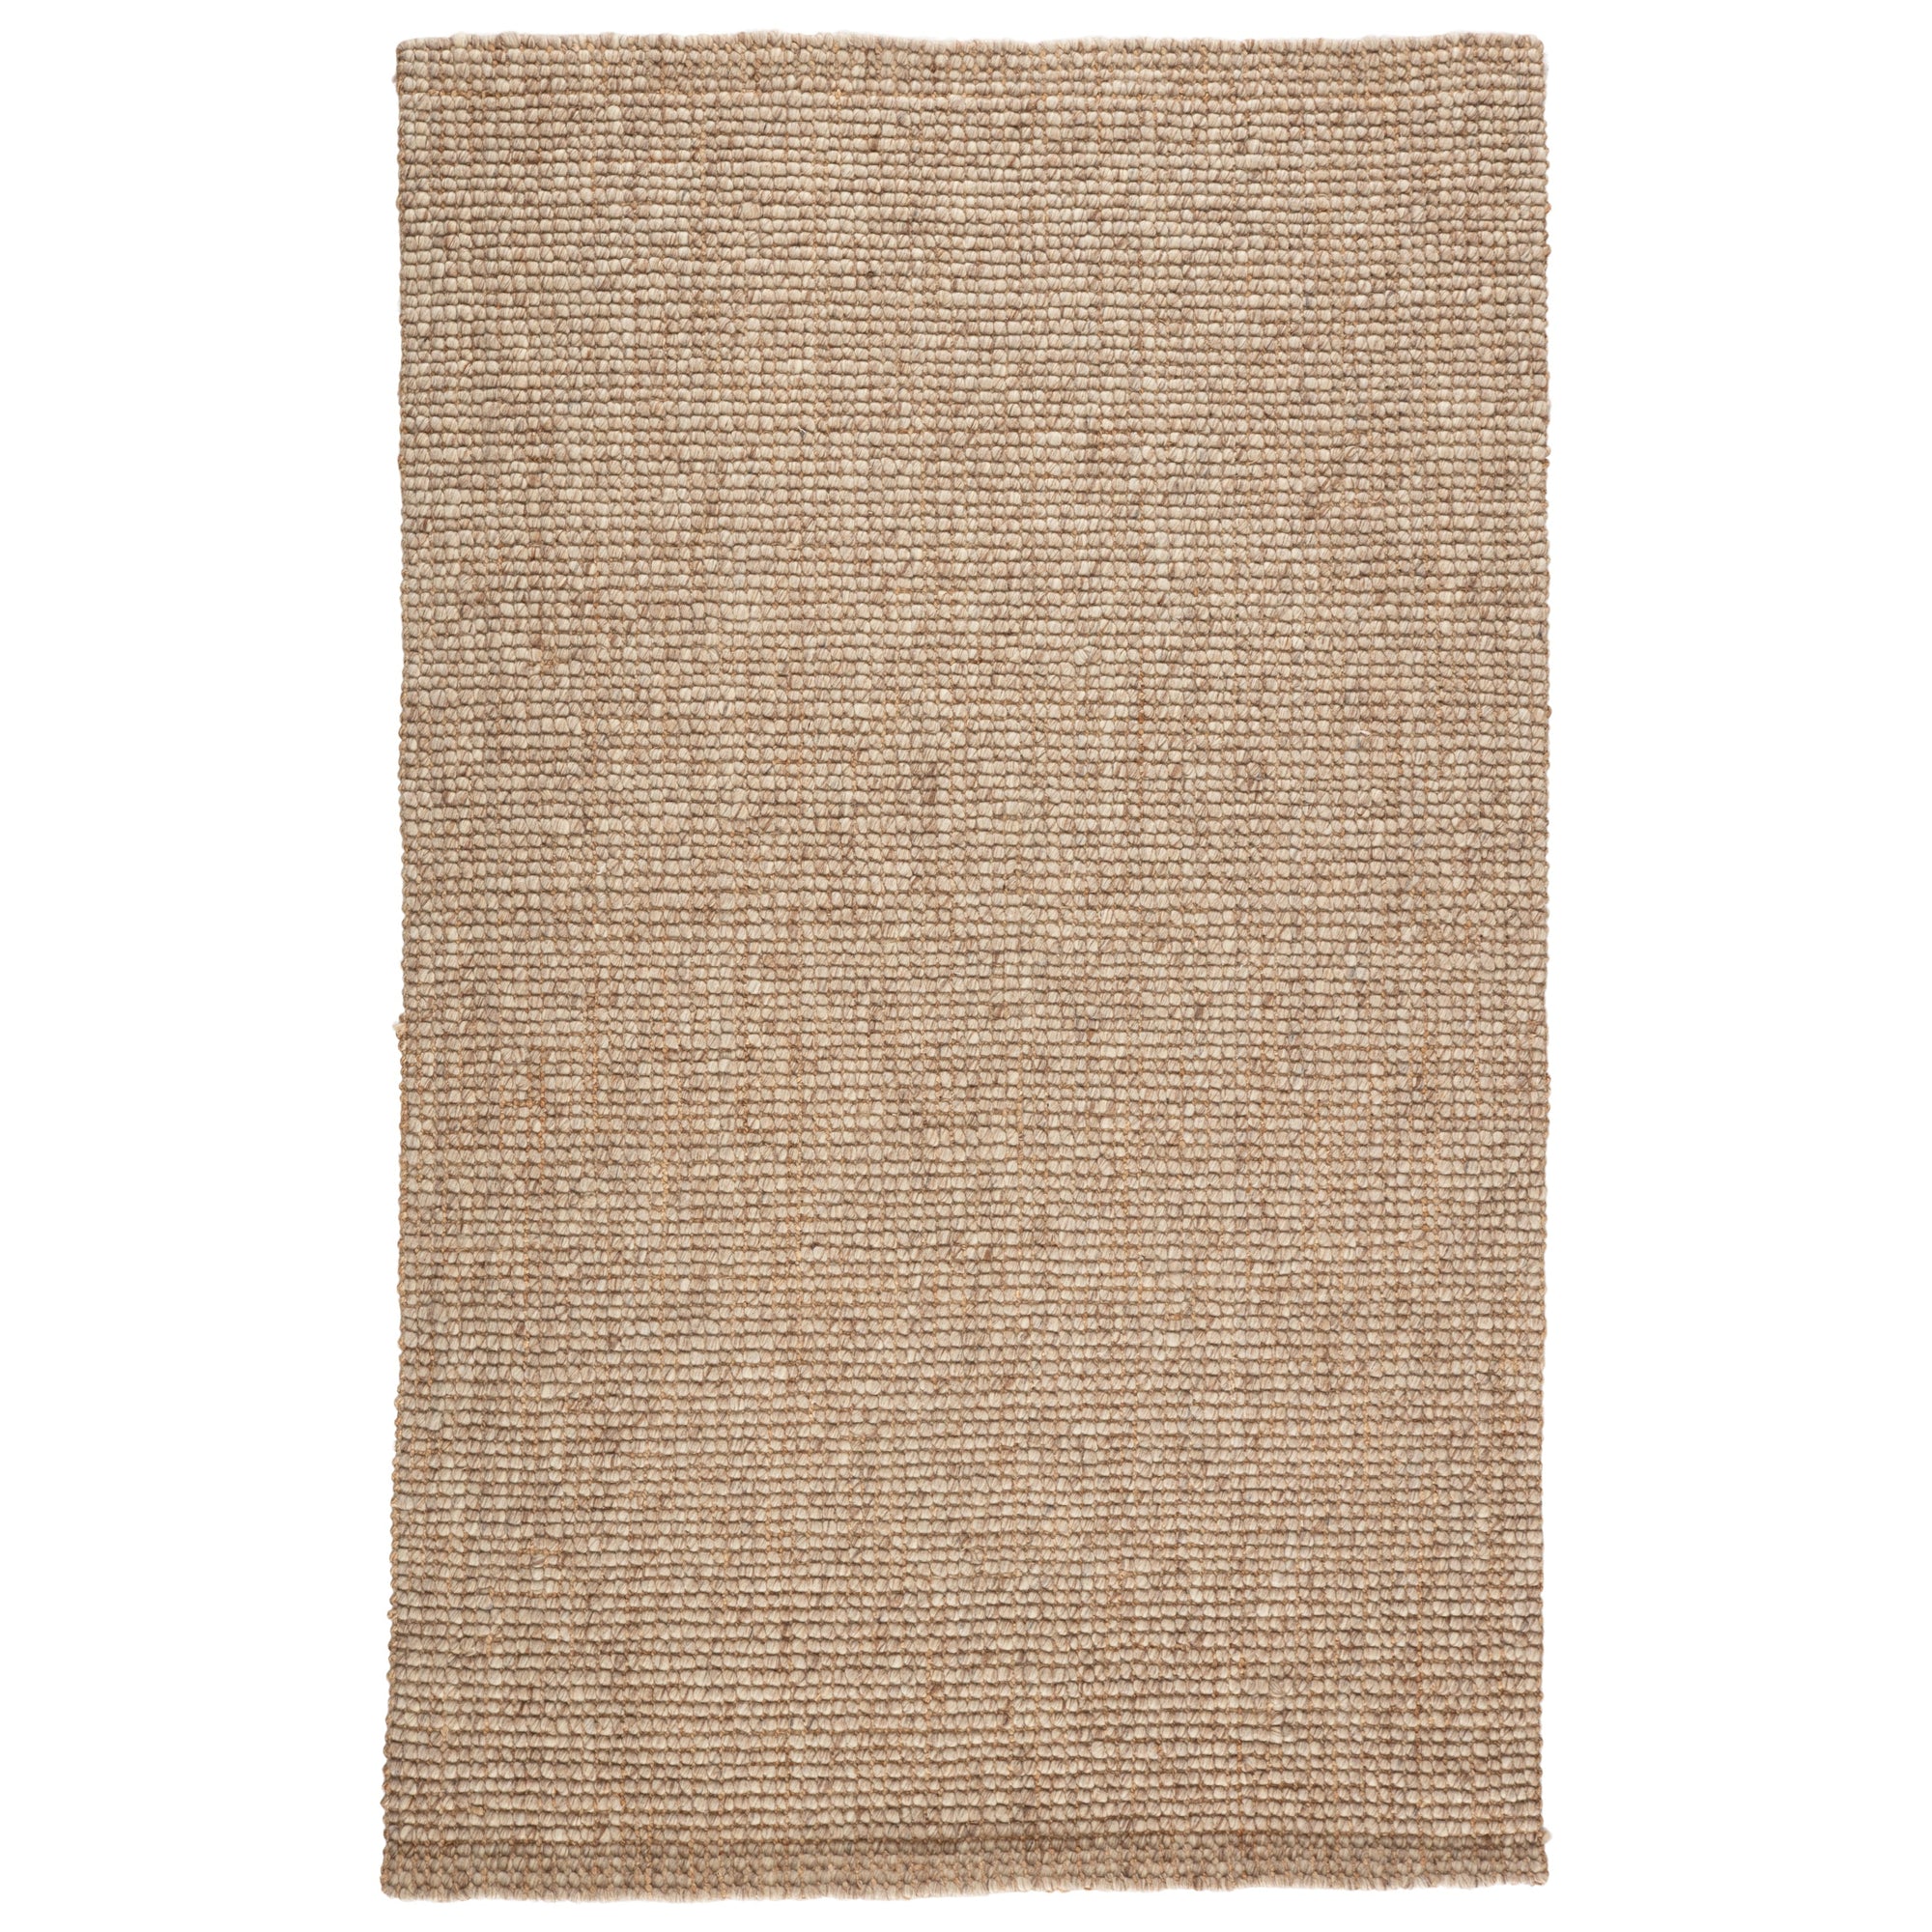 Rugs by Roo | Jaipur Living Oceana Natural Solid Light Gray Tan Area Rug-RUG145819